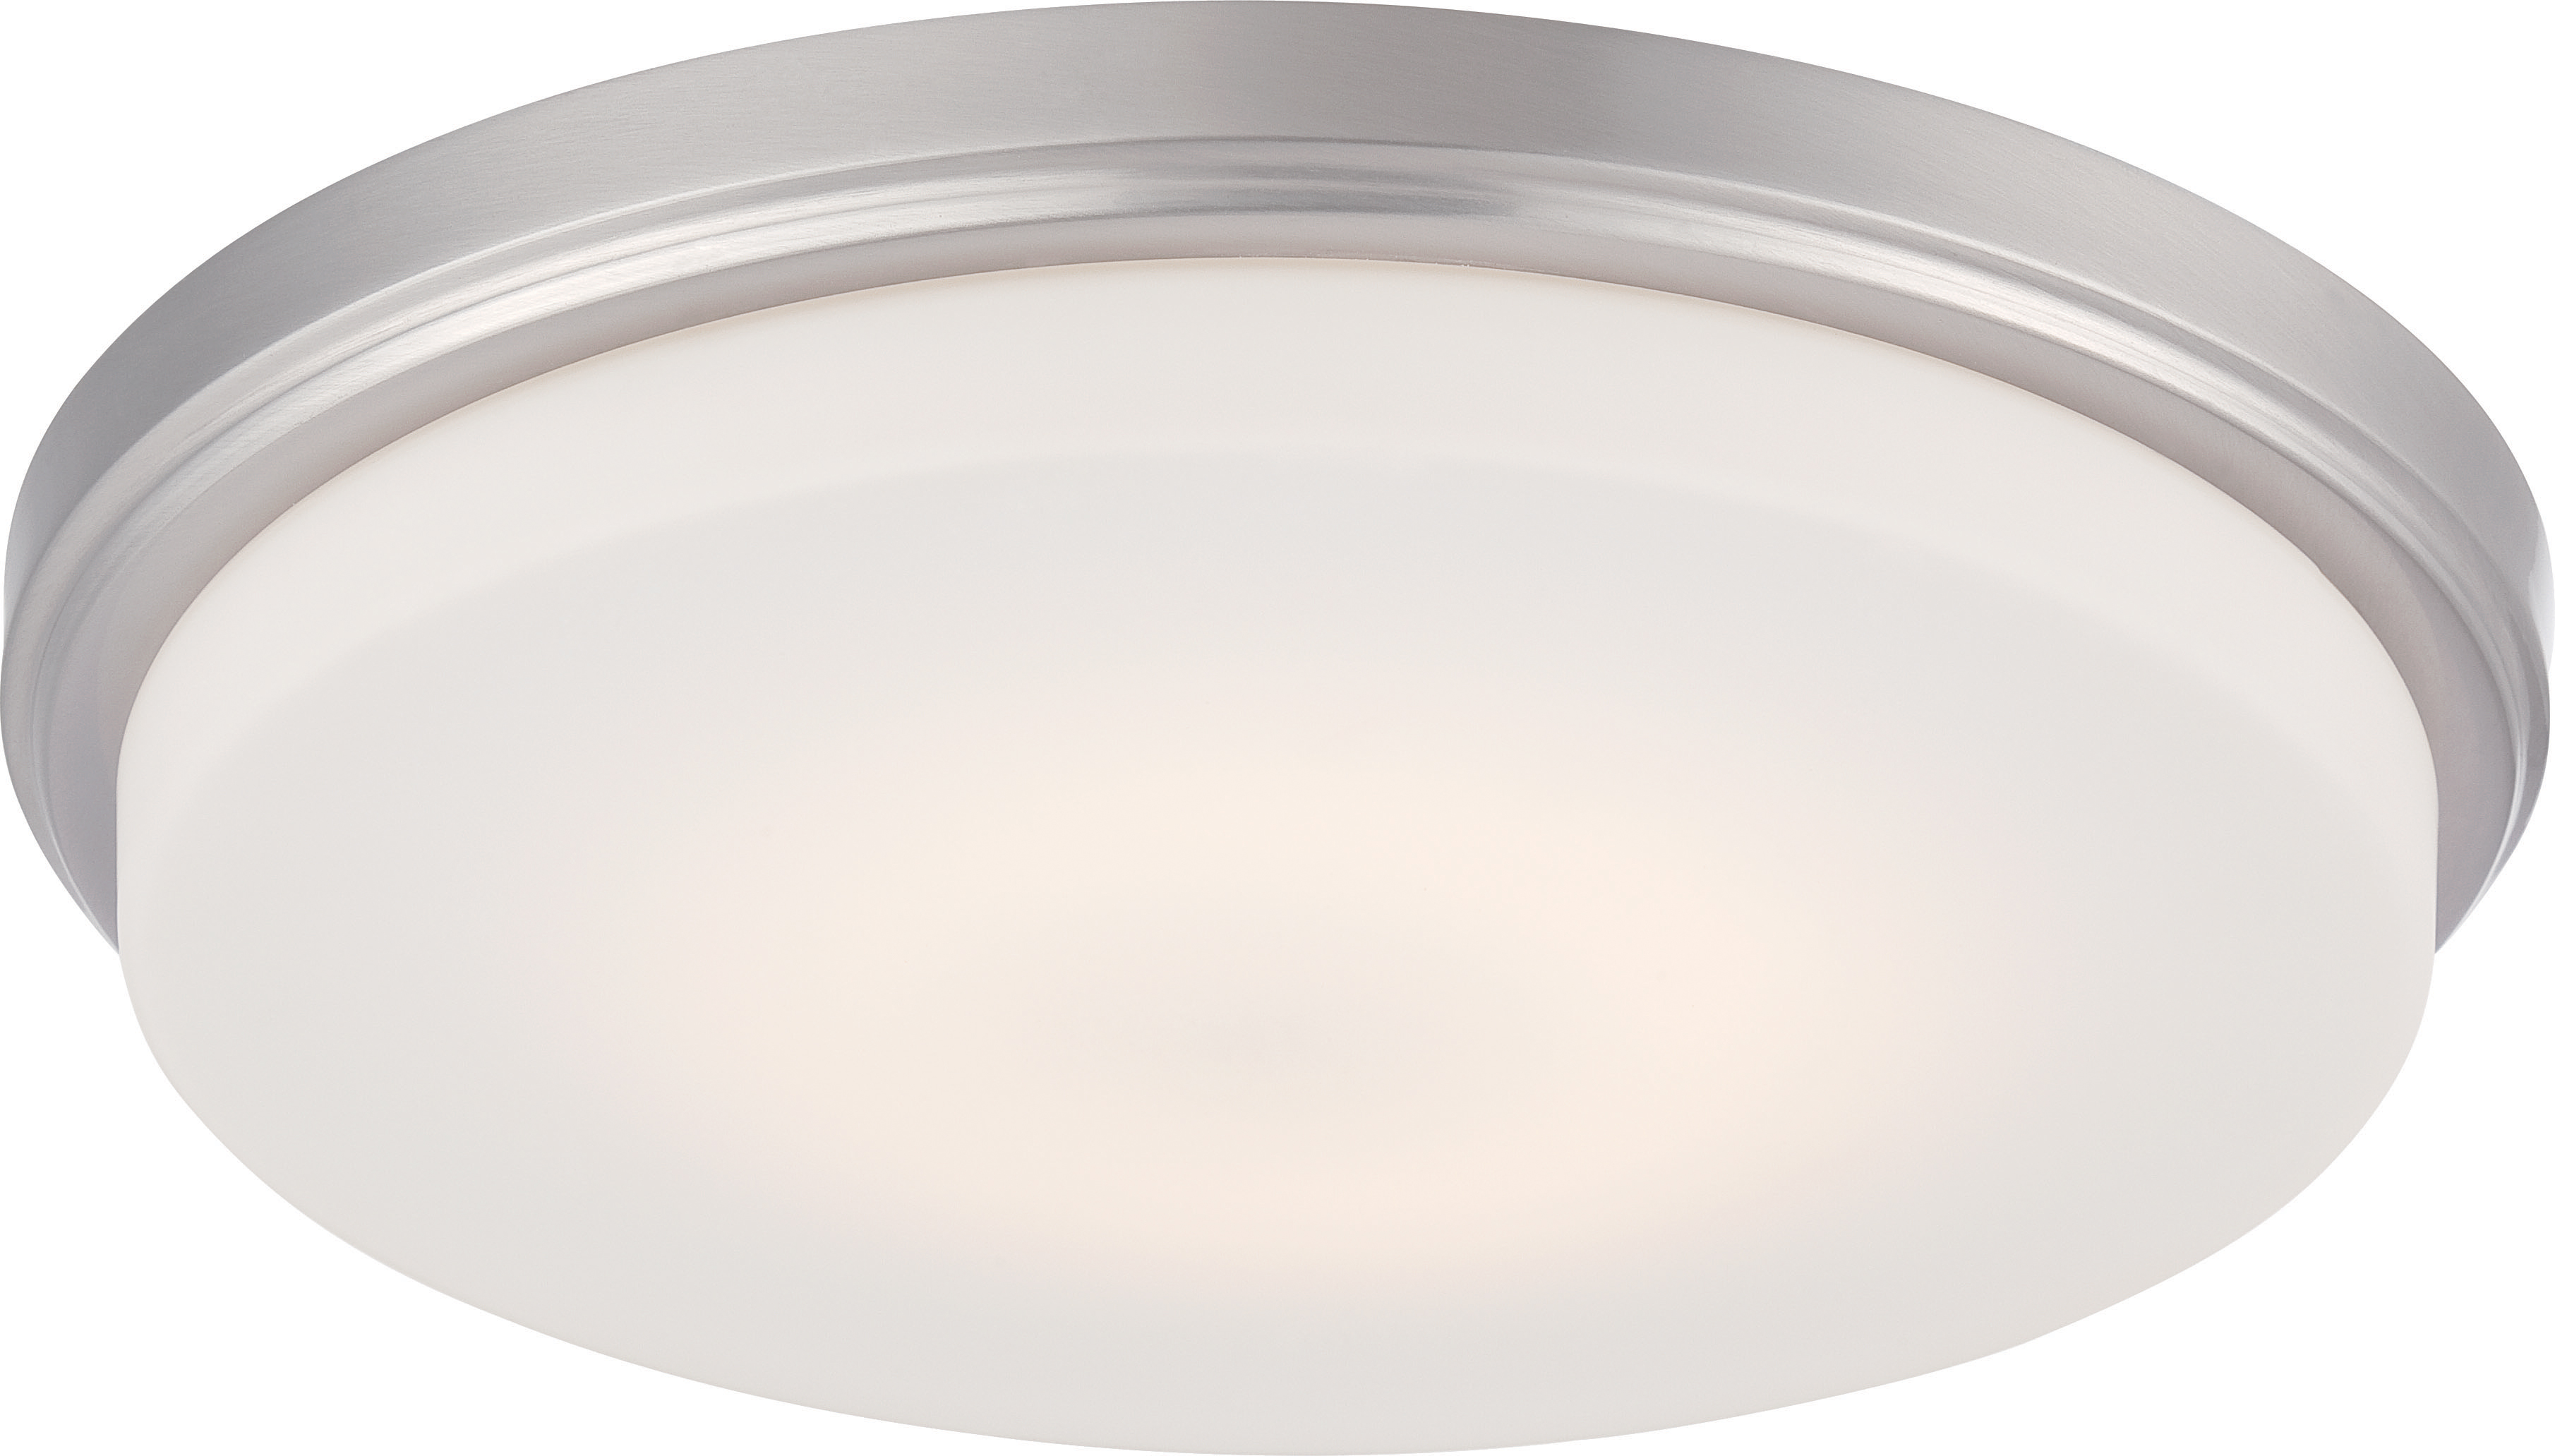 DALE - LED FLUSH FIXTURE WITH OPAL FROSTED GLASS